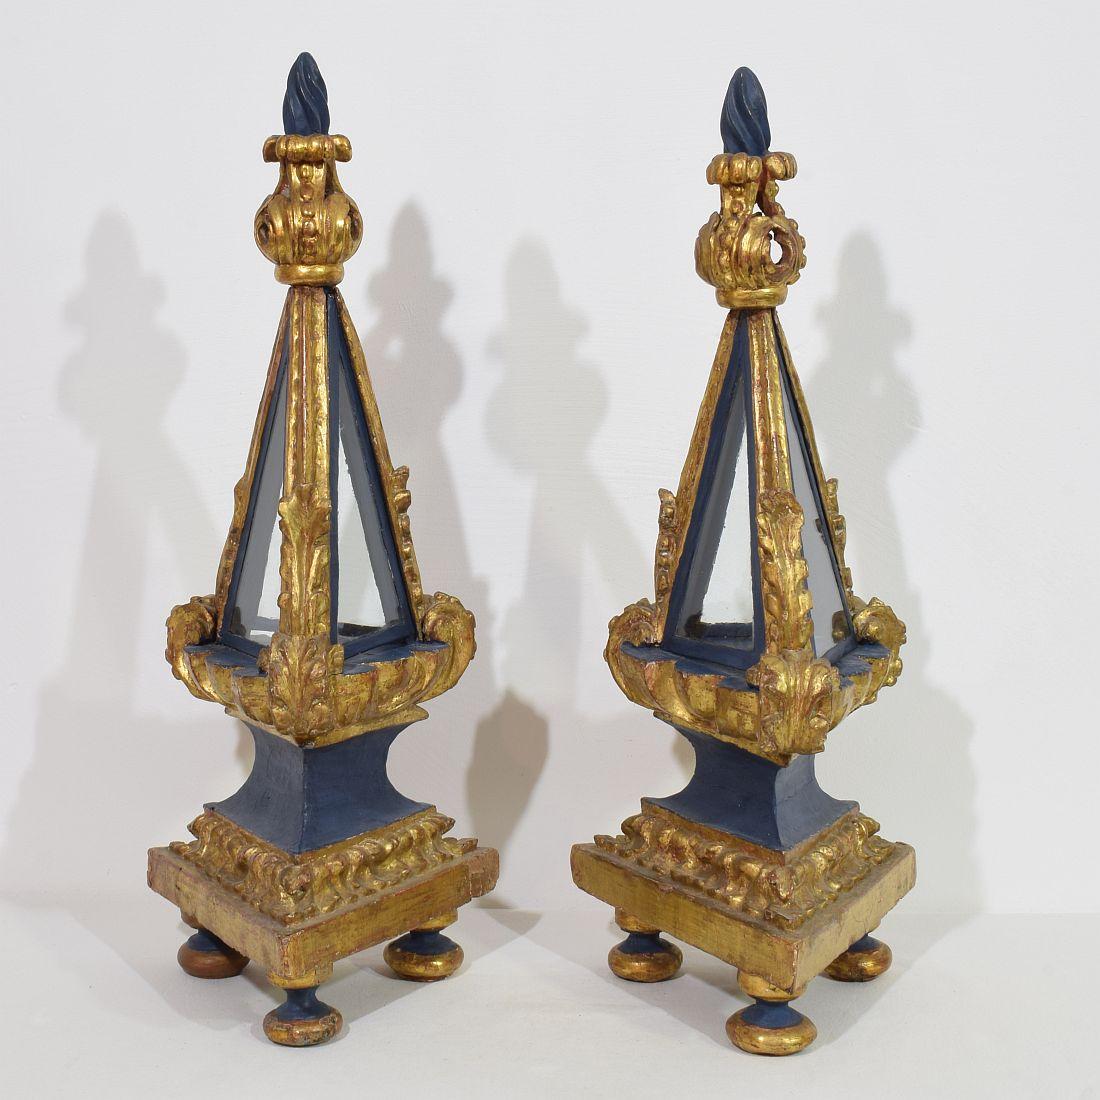 Very rare hand pair carved wooden reliquary shrines with wonderful decoration and color/gilding, 
Italy, circa 1750
Weathered, small losses and old repairs. ( to my opinion glass once replaced)
H:63/64cm  W:25,5cm D:22cm 
Measurement